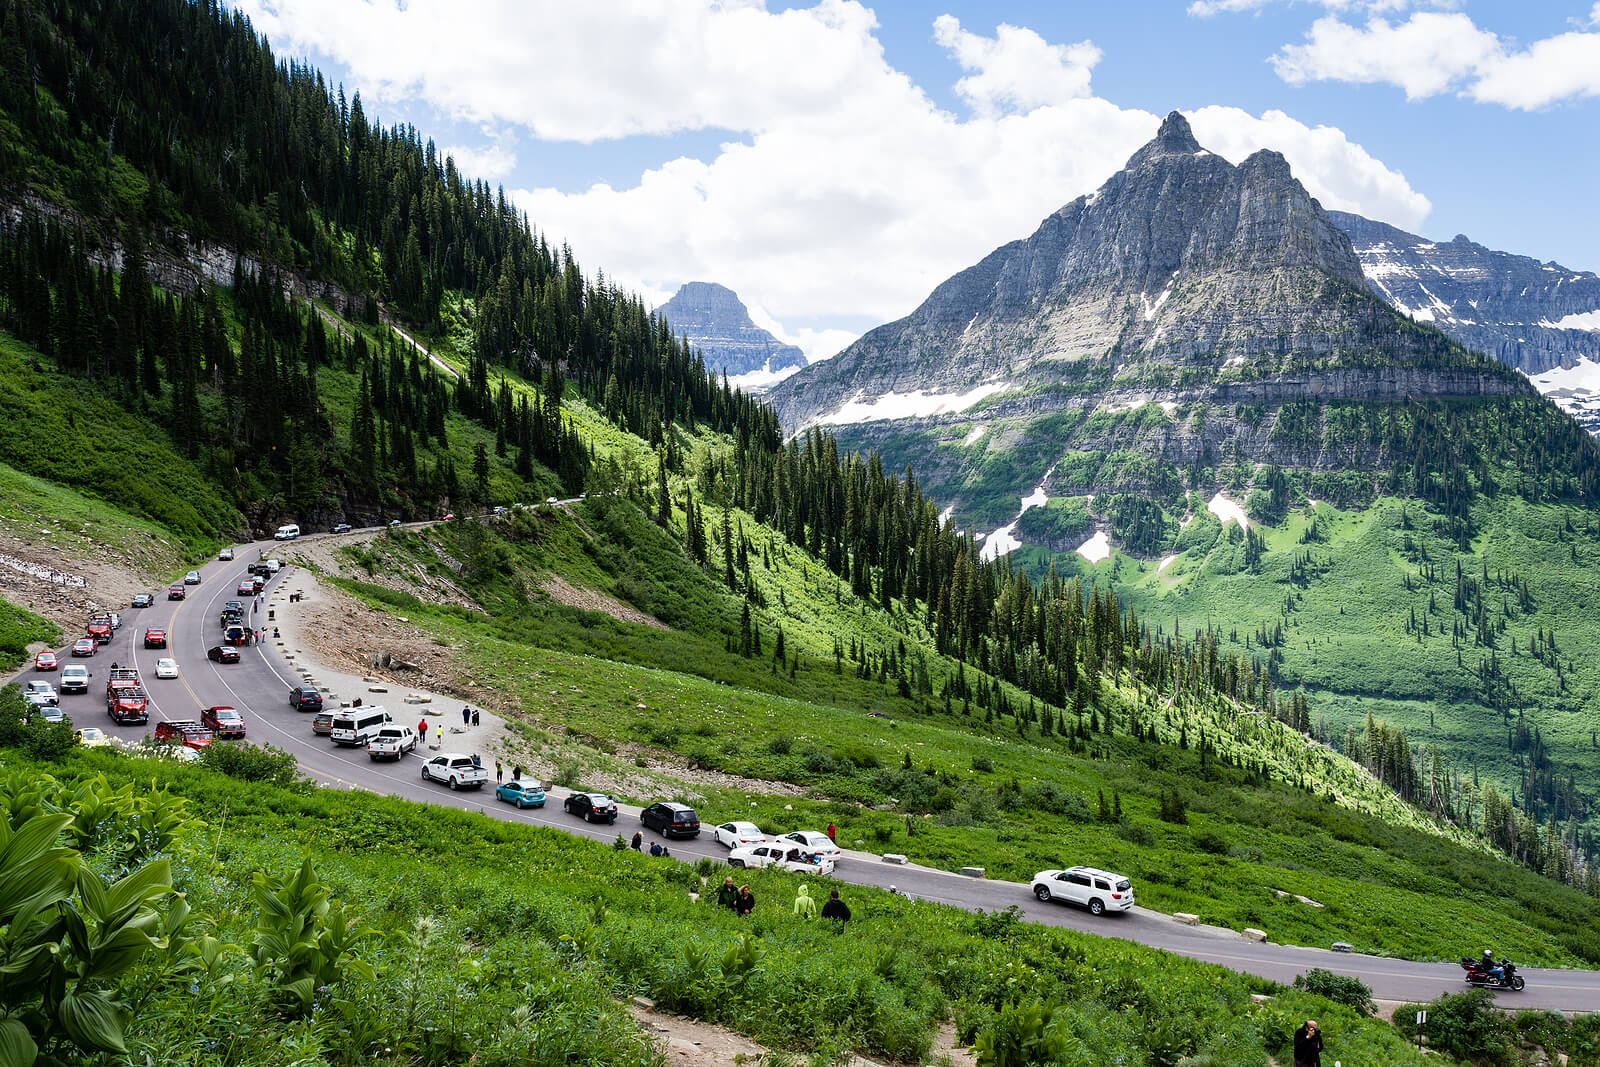 SUV rentals in Bozeman MT from Journey Rent-A-Car